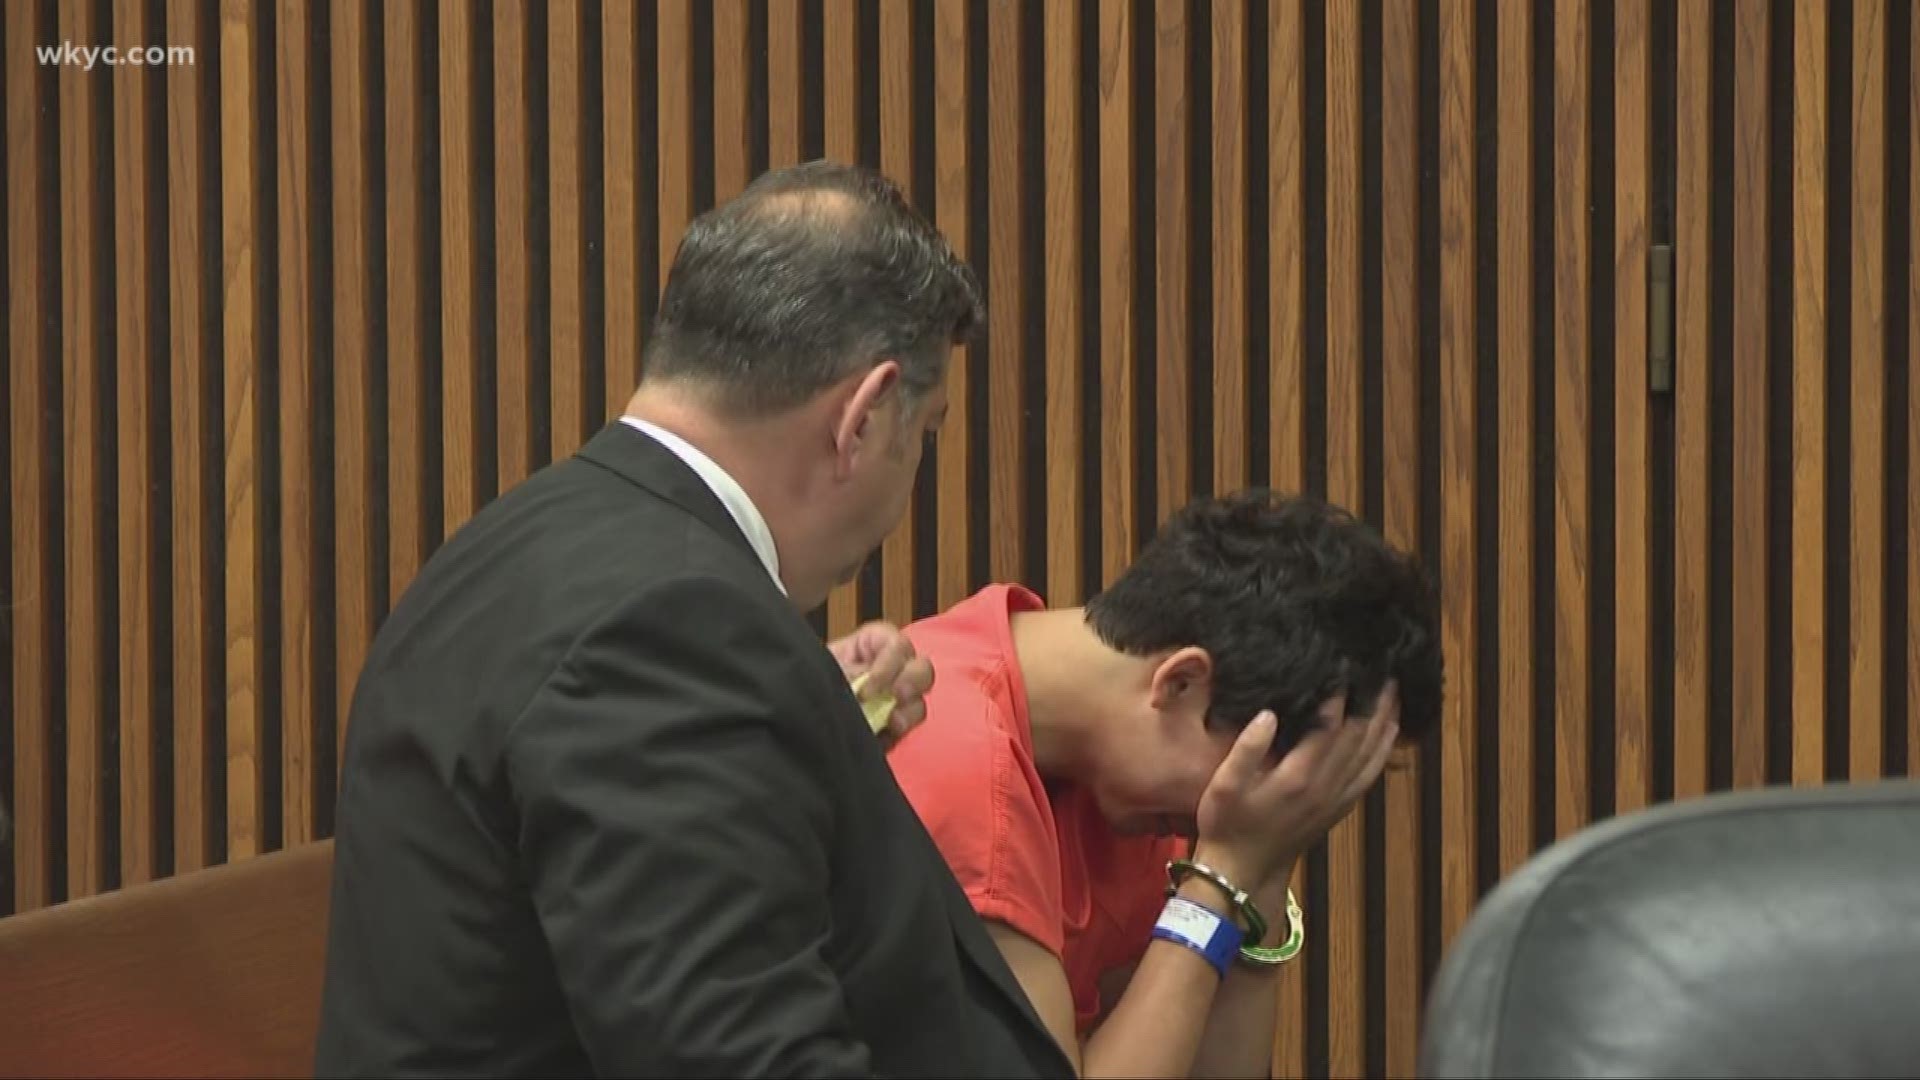 Teen suspect breaks down in tears before facing judge in deadly Cleveland scooter crash